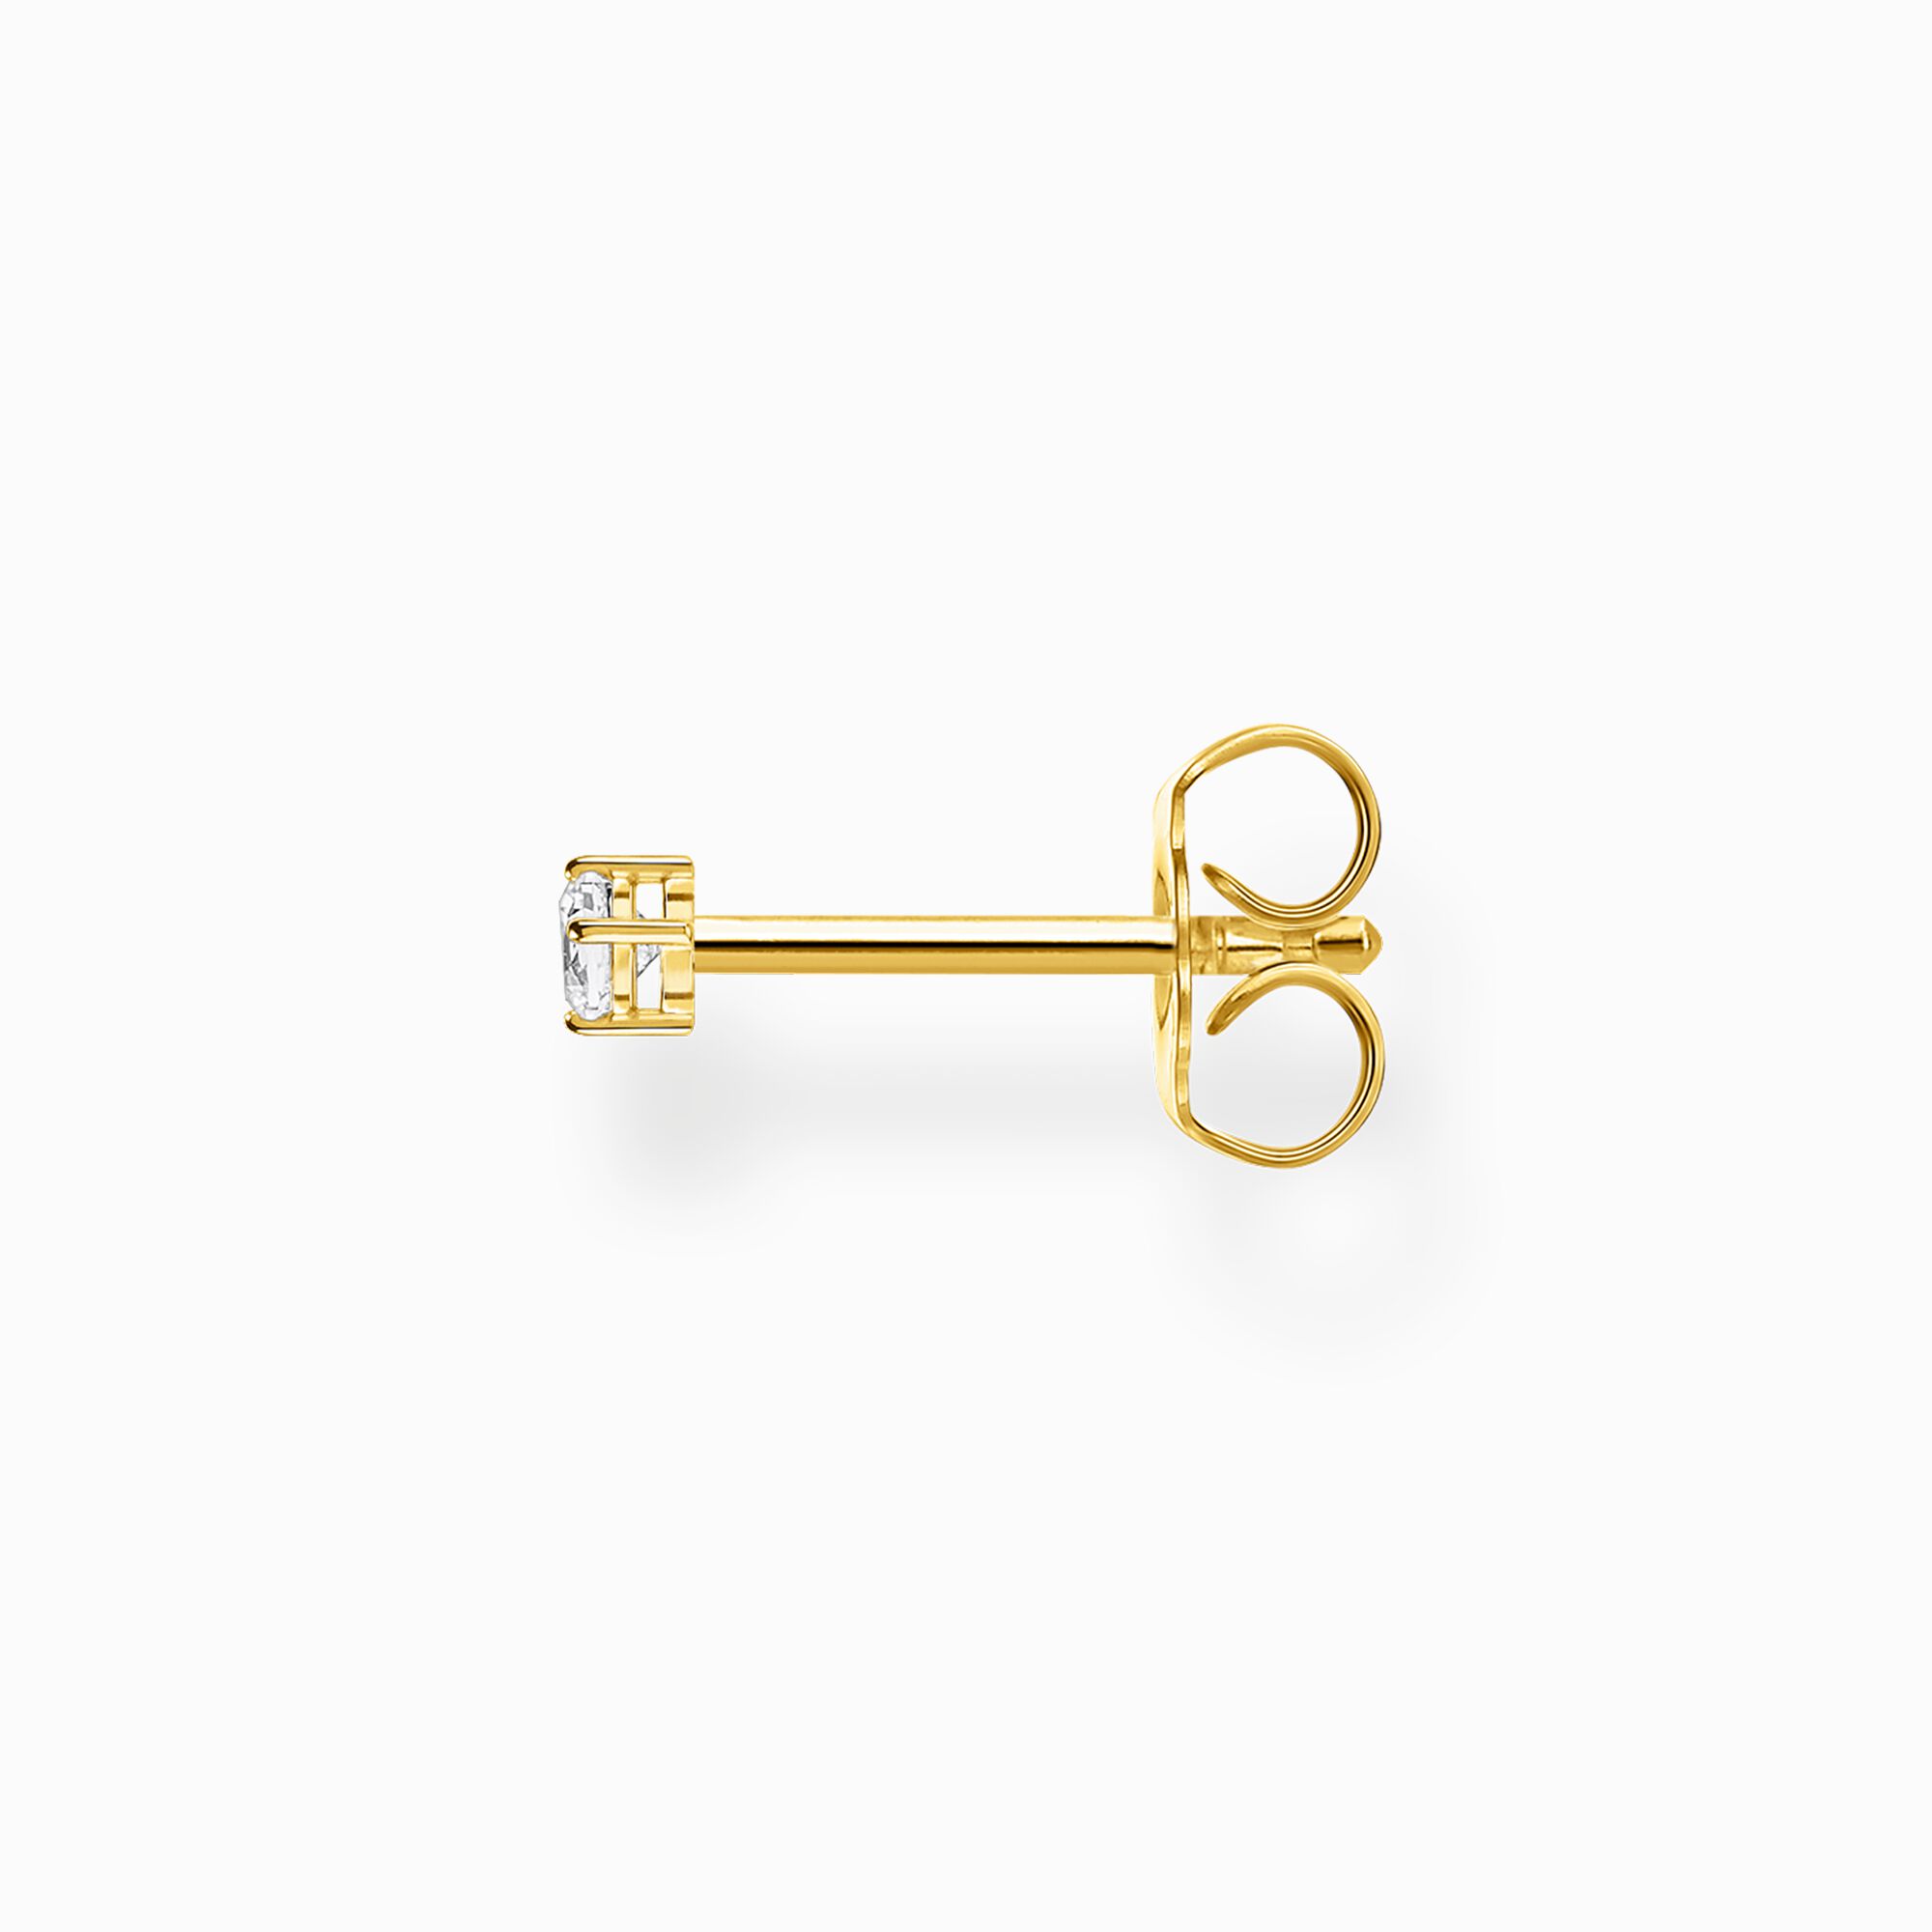 Ear stud in gold with zirconia centrepiece │ THOMAS SABO